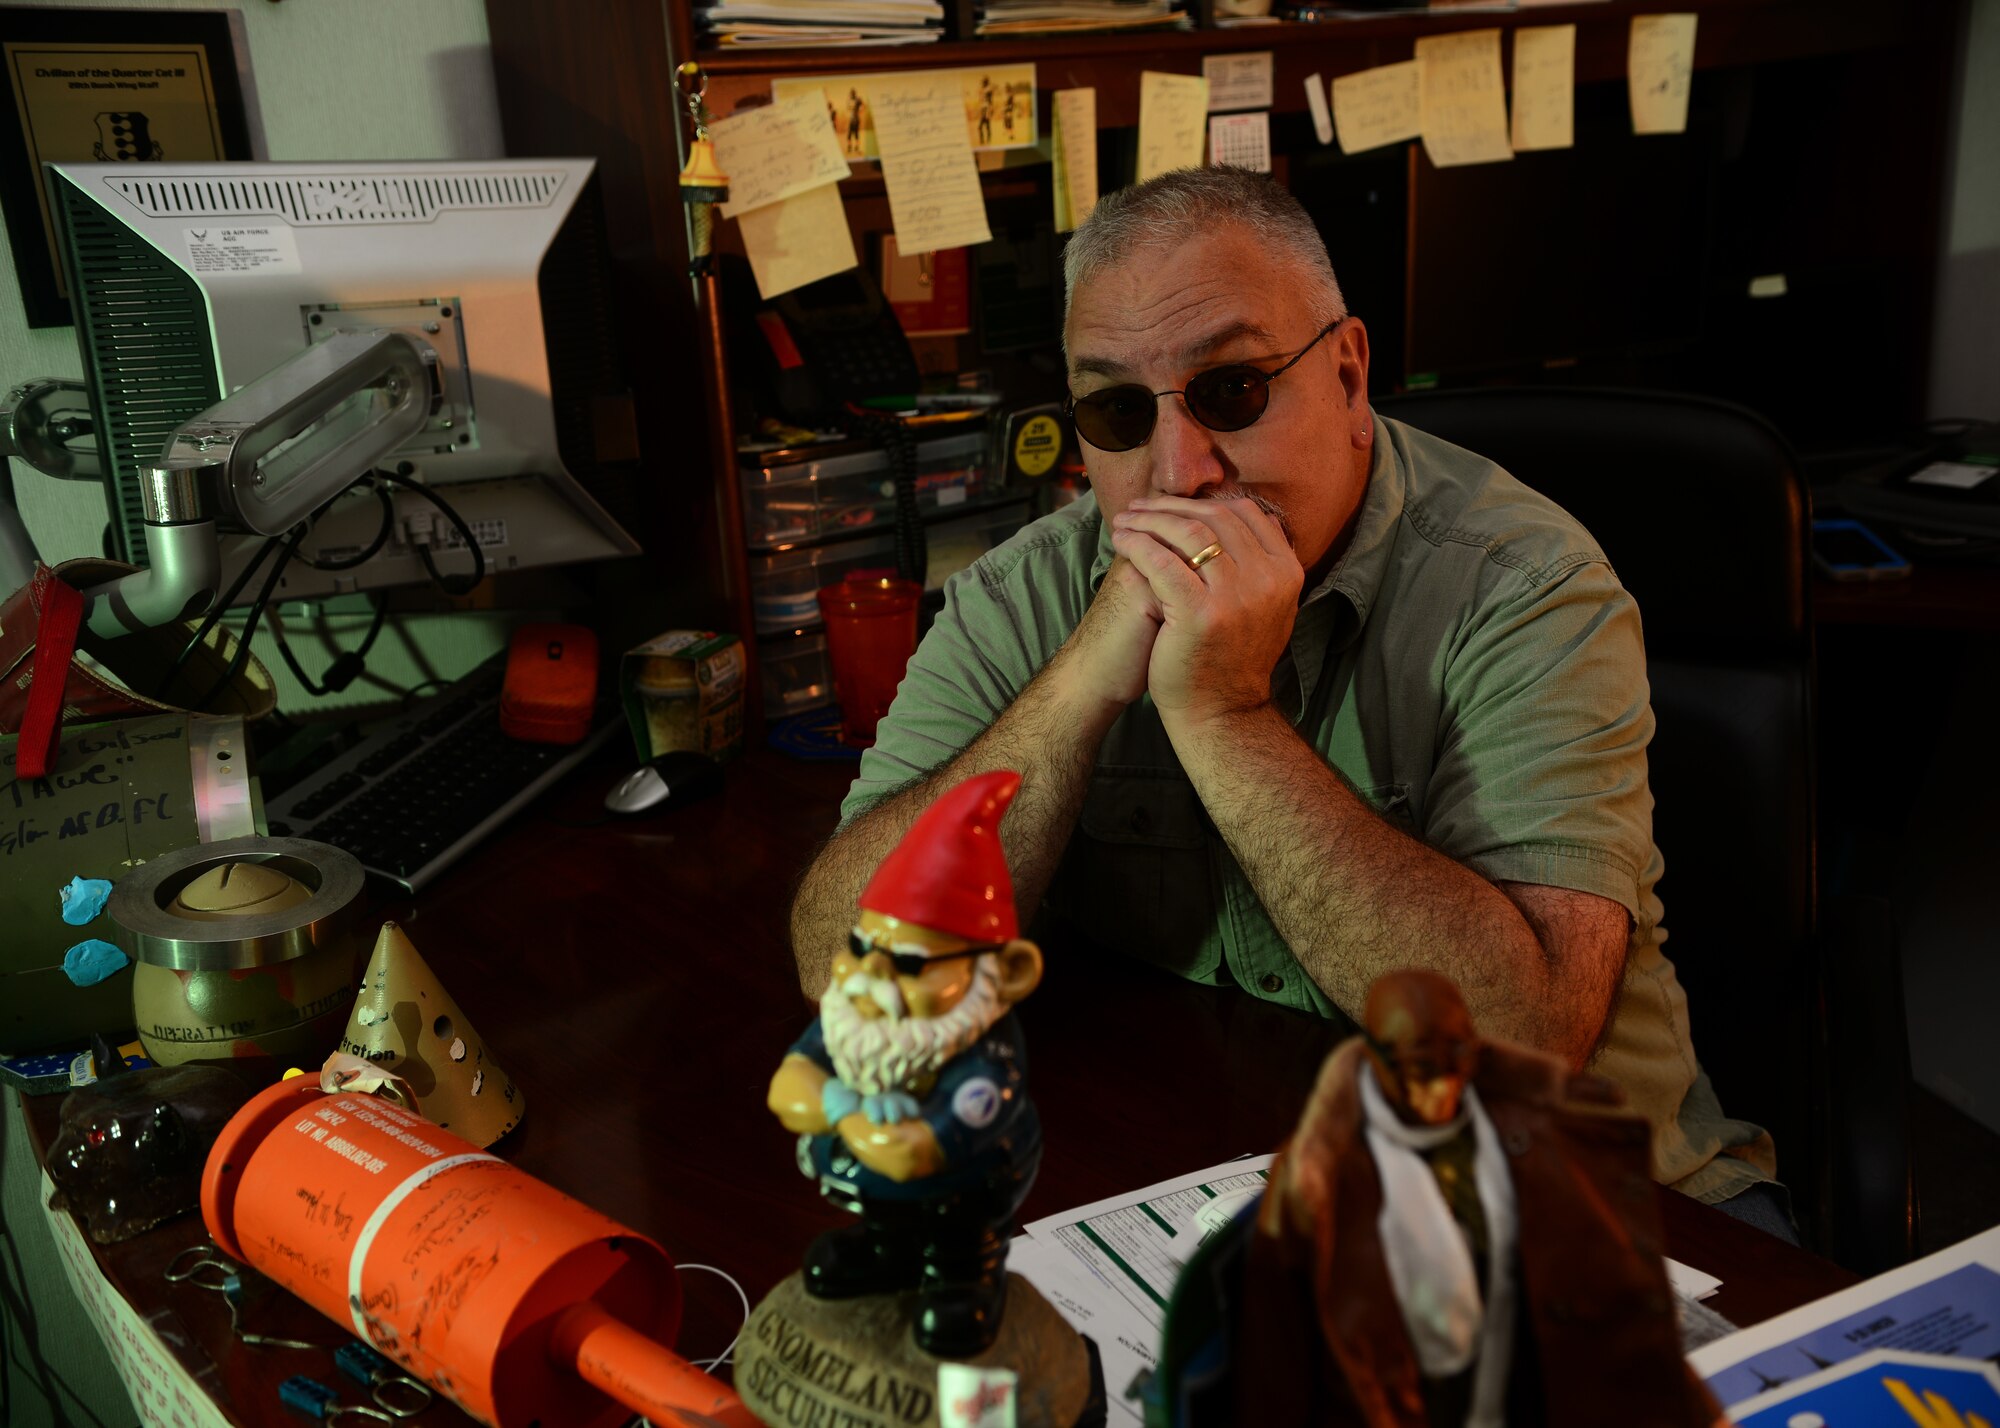 John Moyes, the 28th Bomb Wing historian, poses at his desk inside the 28th BW headquarters on Ellsworth Air Force Base, S.D., Aug. 21, 2018. Moyes was a prior munitions systems specialist and years after separating, became an Air Force historian. (U.S. Air Force photo by Senior Airman Denise Jenson)